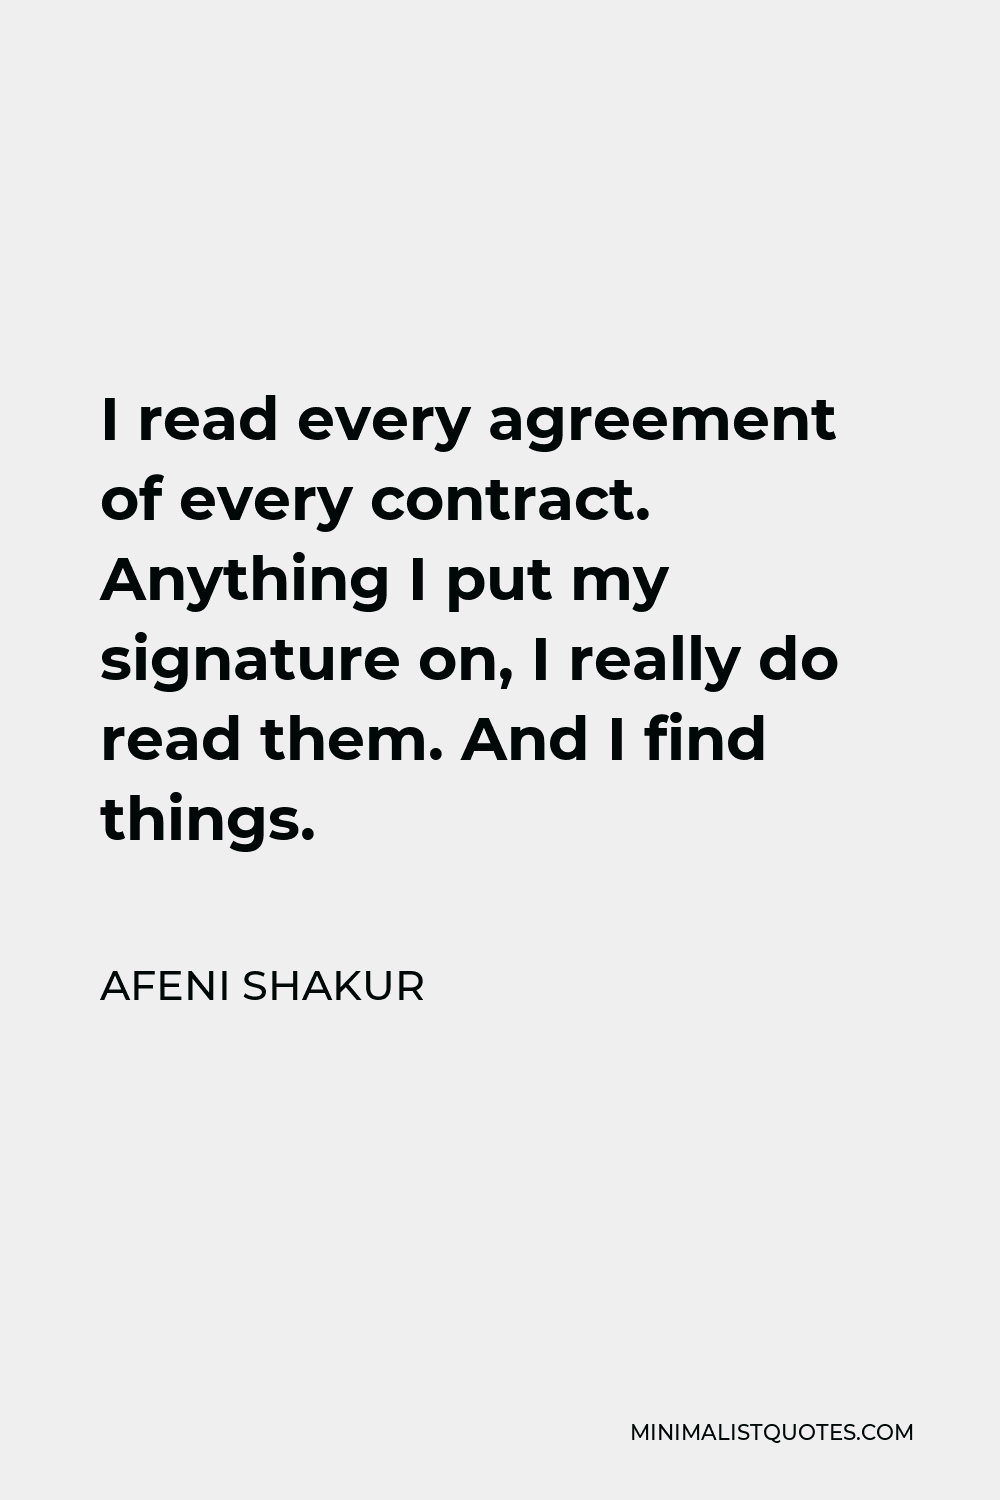 Afeni Shakur Quote - I read every agreement of every contract. Anything I put my signature on, I really do read them. And I find things.